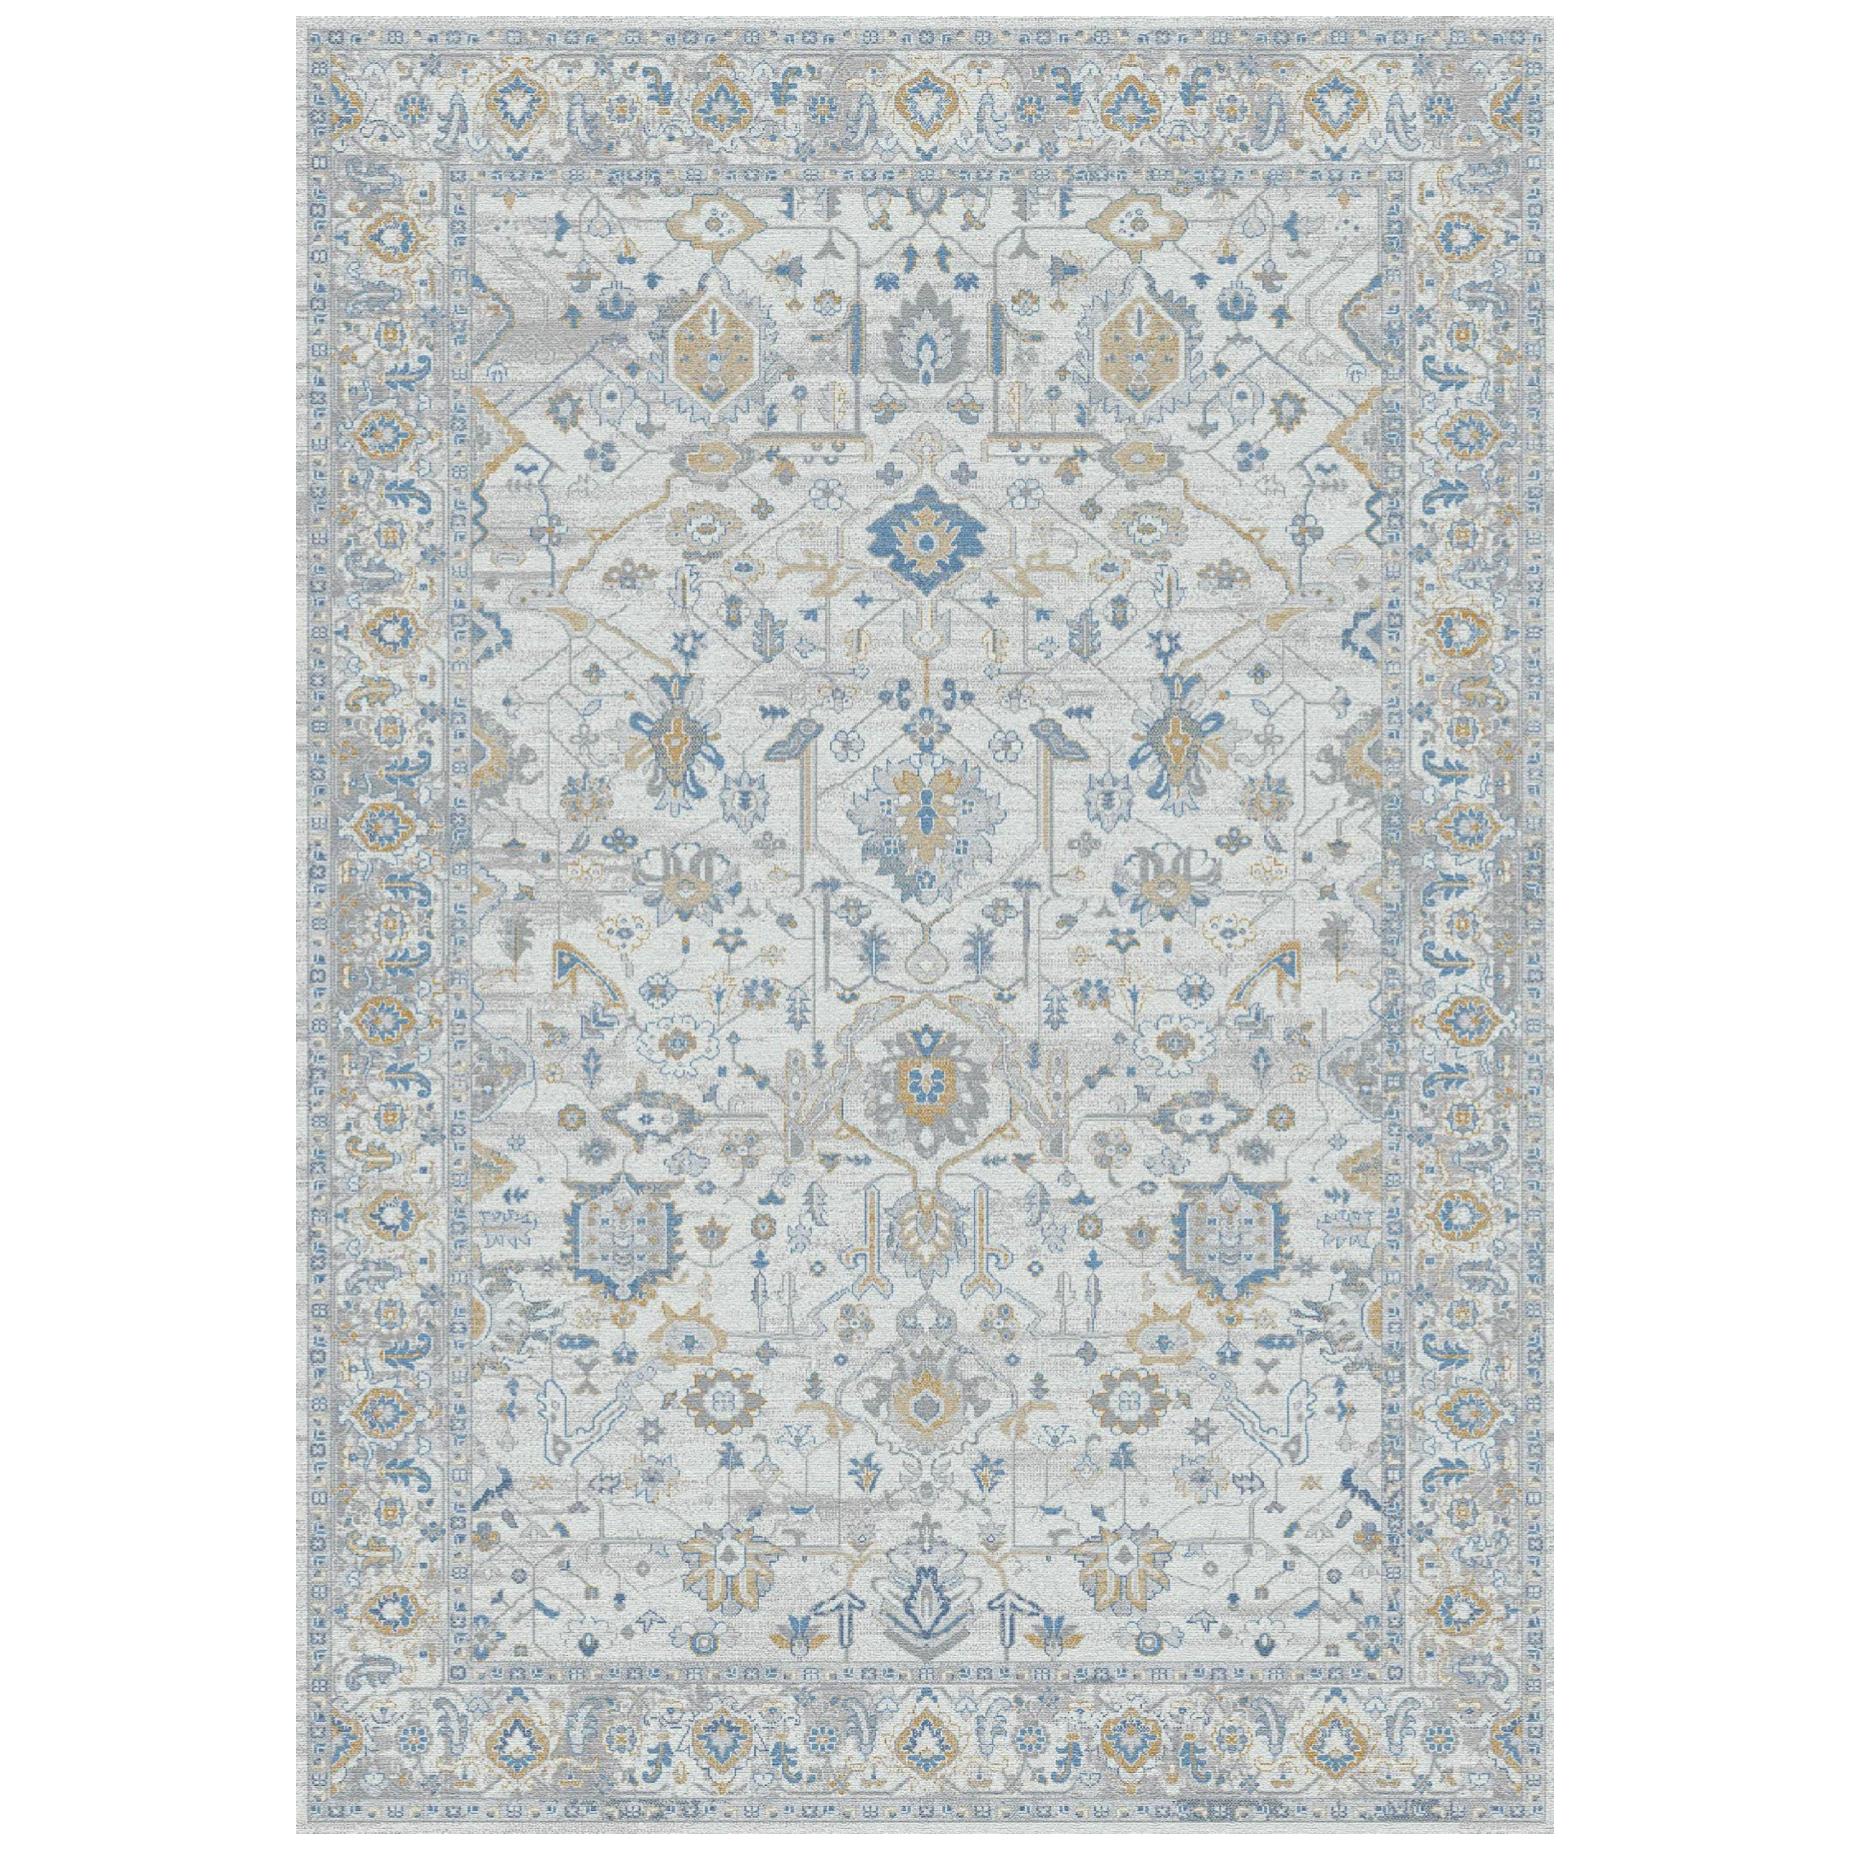 Gold 5x8 Area Rug